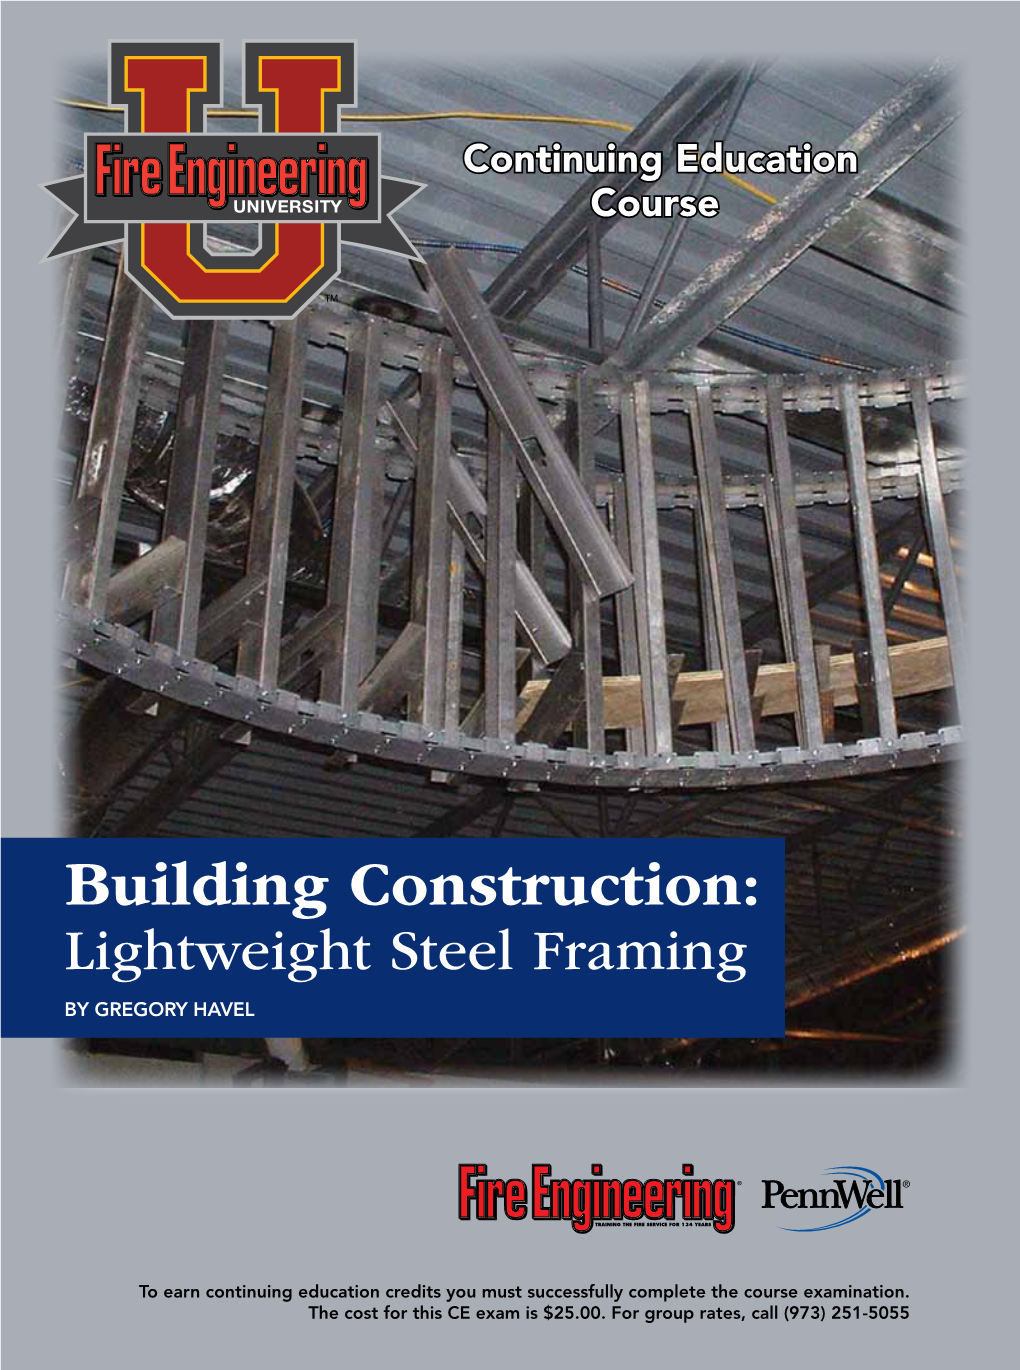 Building Construction: Lightweight Steel Framing by GREGORY HAVEL